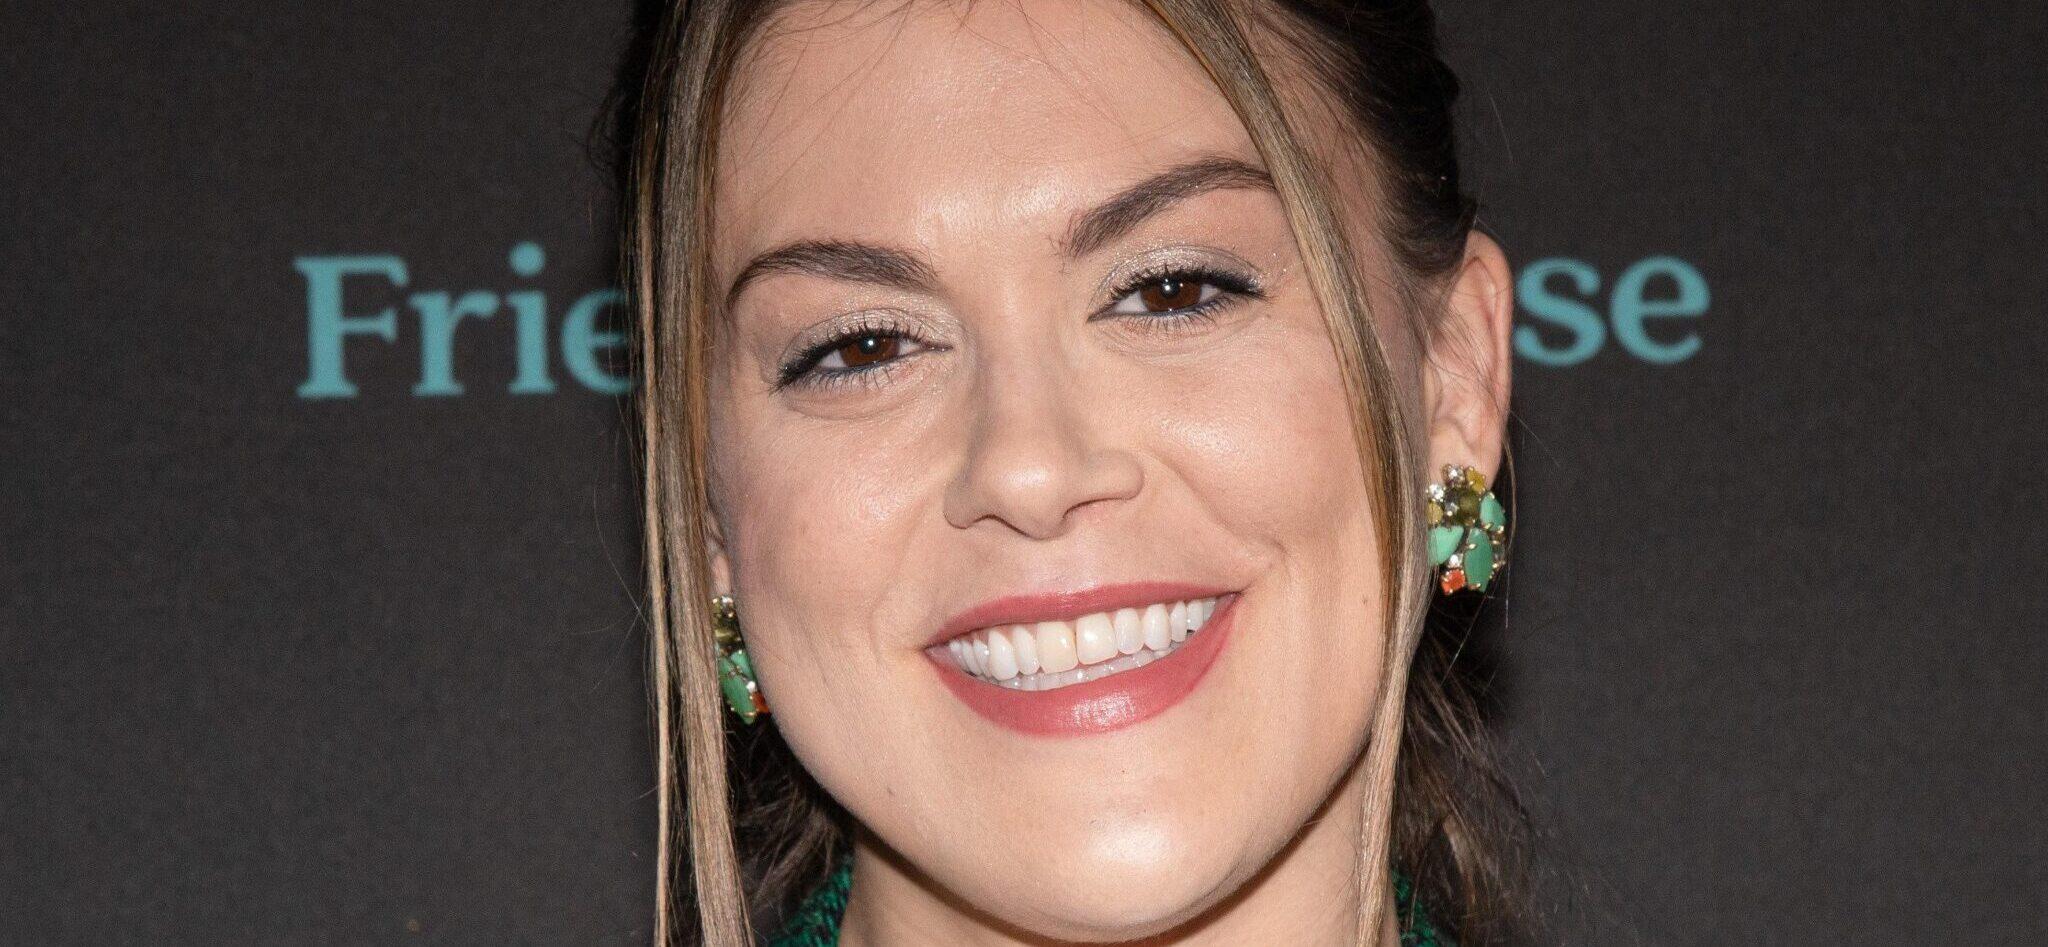 Lindsey Shaw's Juicy Confession: Had S-x With This 'Ned's Declassified' Co-Star